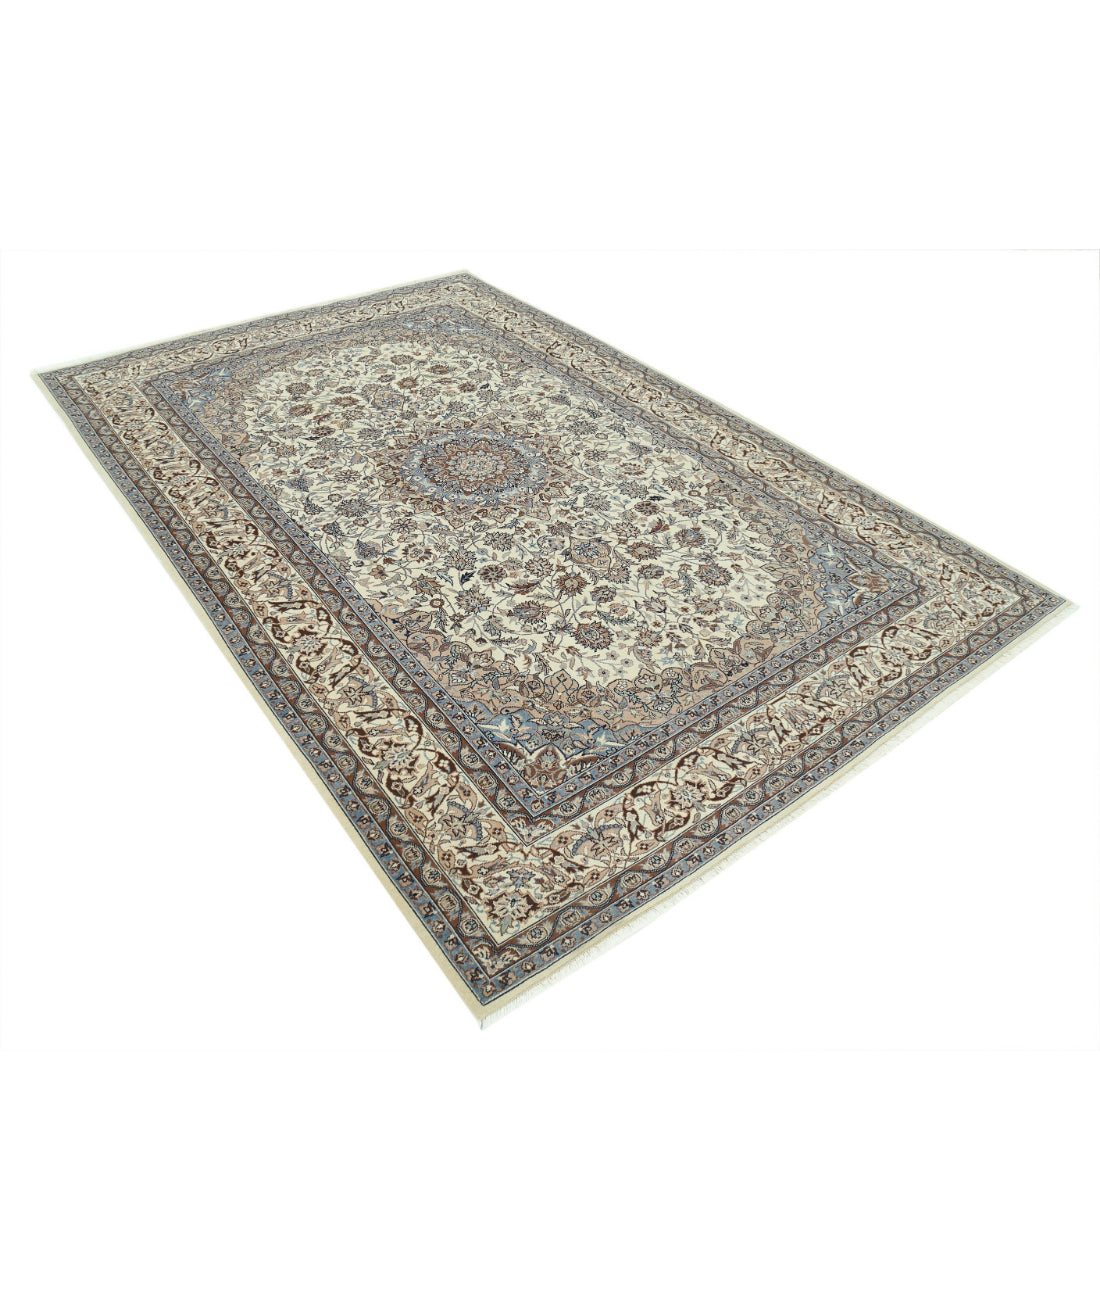 Hand Knotted Heritage Fine Persian Style Wool Rug - 5'11'' x 9'0'' 5'11'' x 9'0'' (178 X 270) / Ivory / Ivory